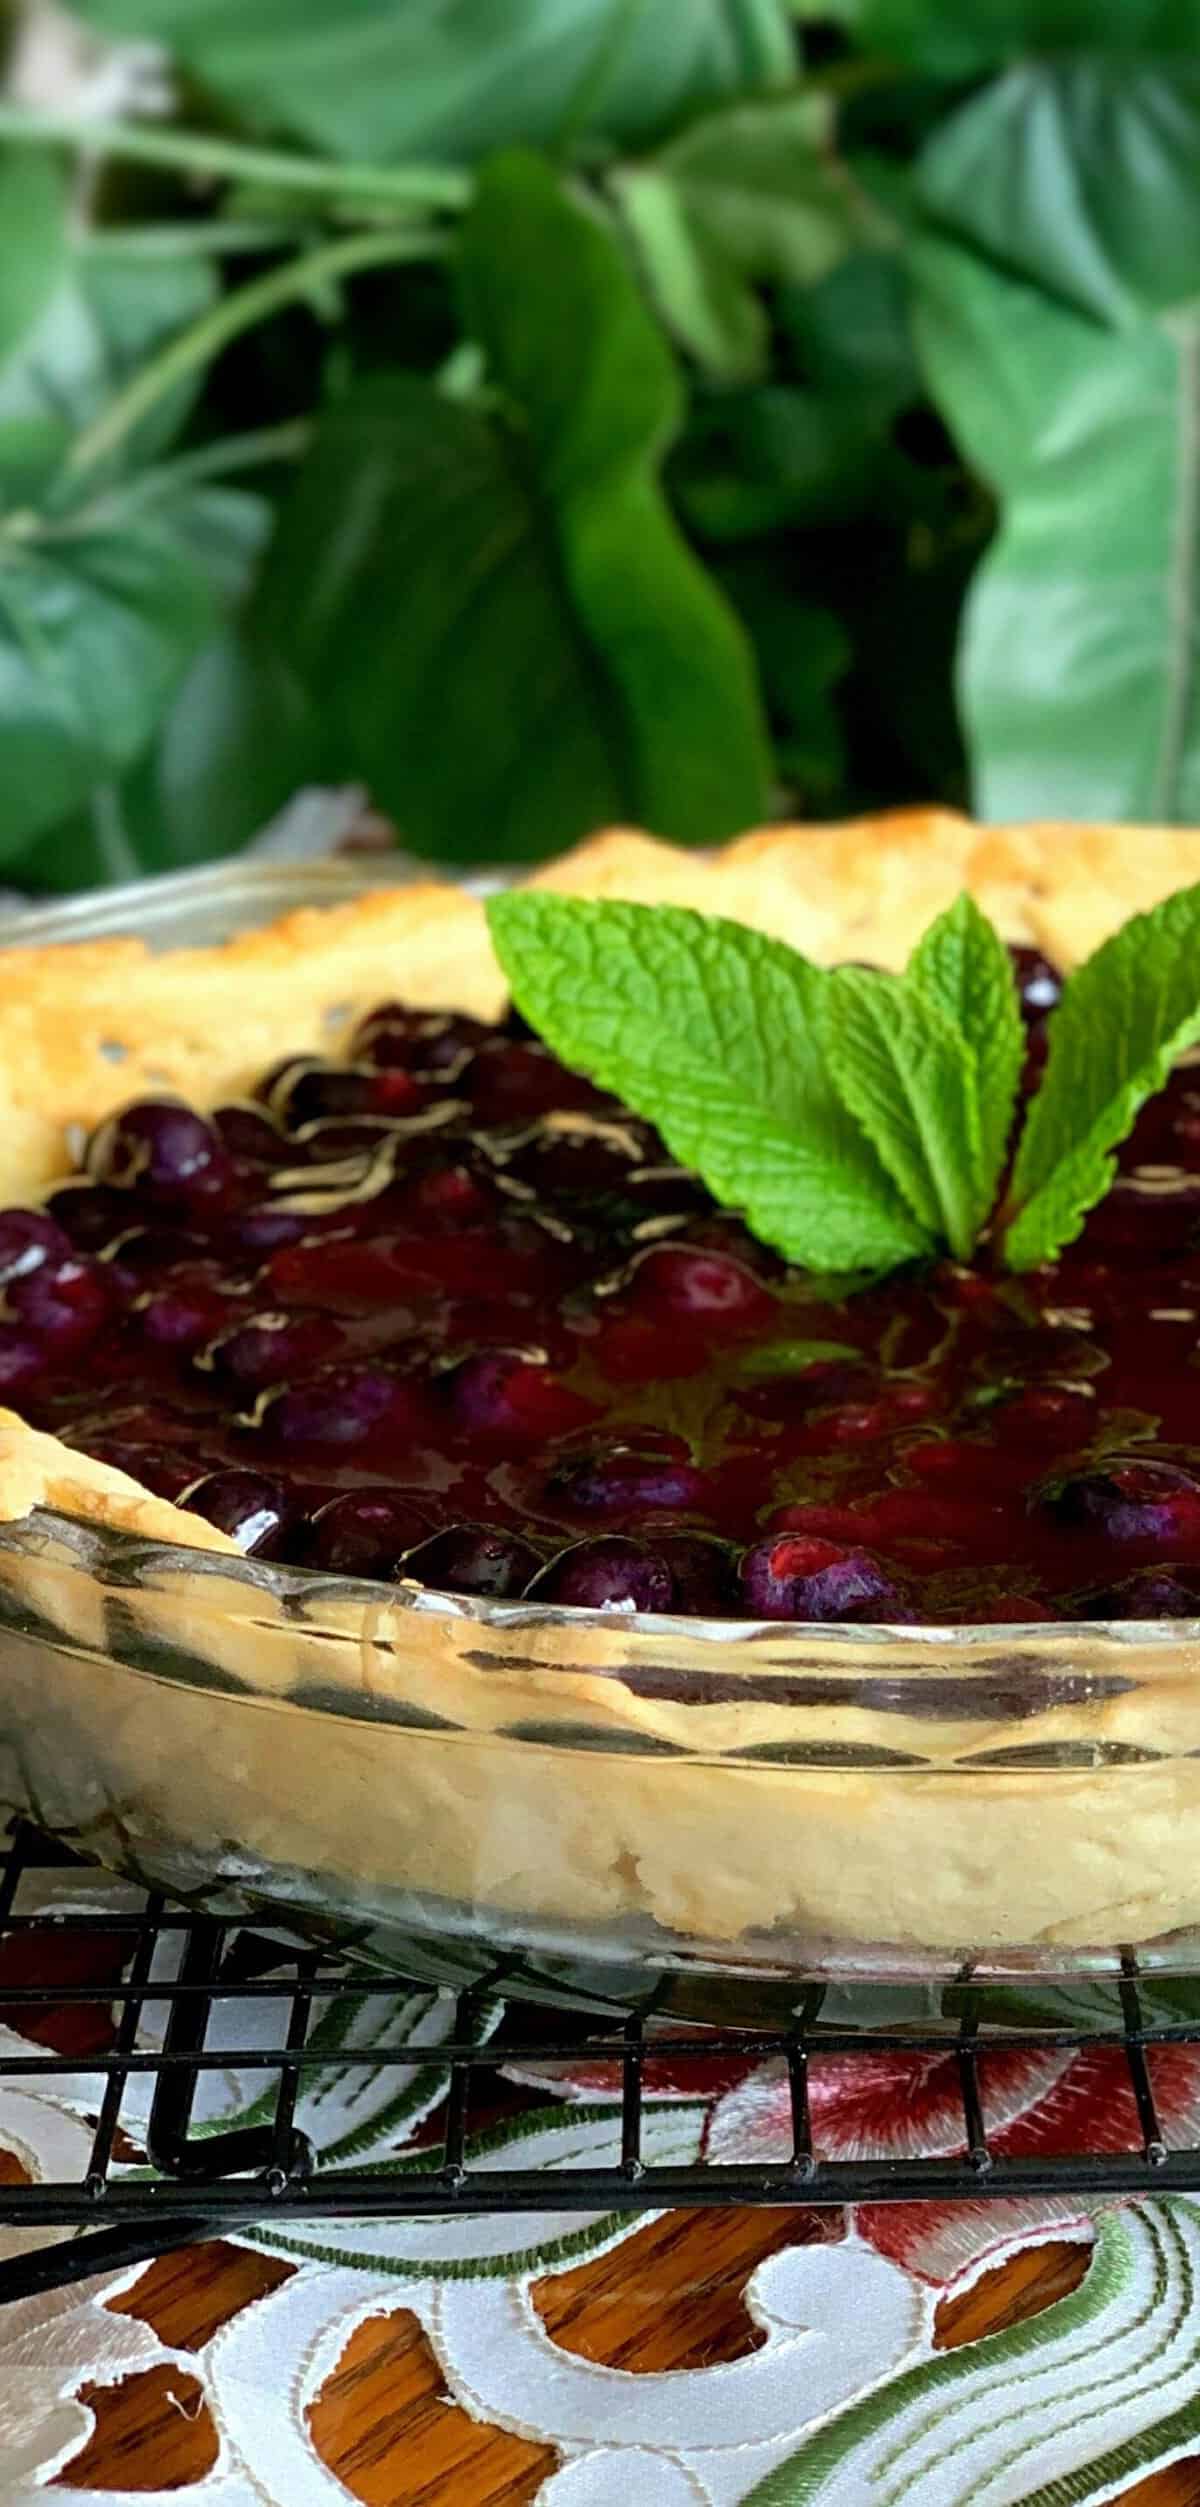  Fresh blueberries, the star of this pie